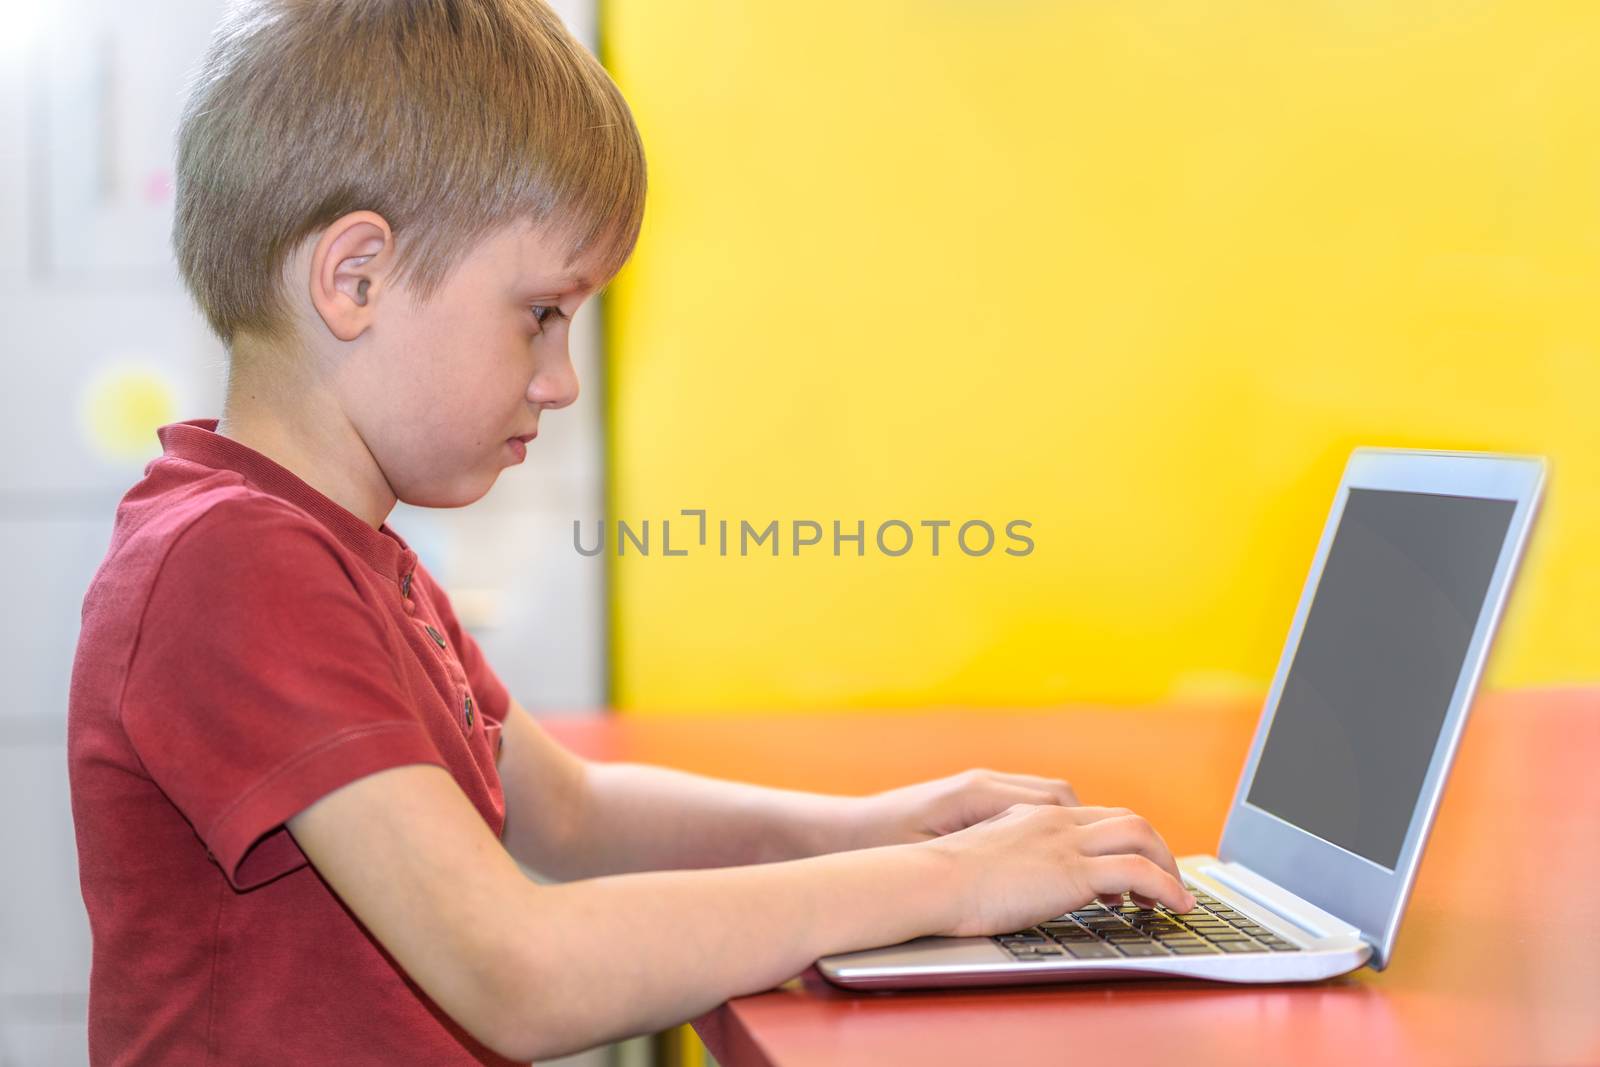 Young boy working on a laptop by wdnet_studio